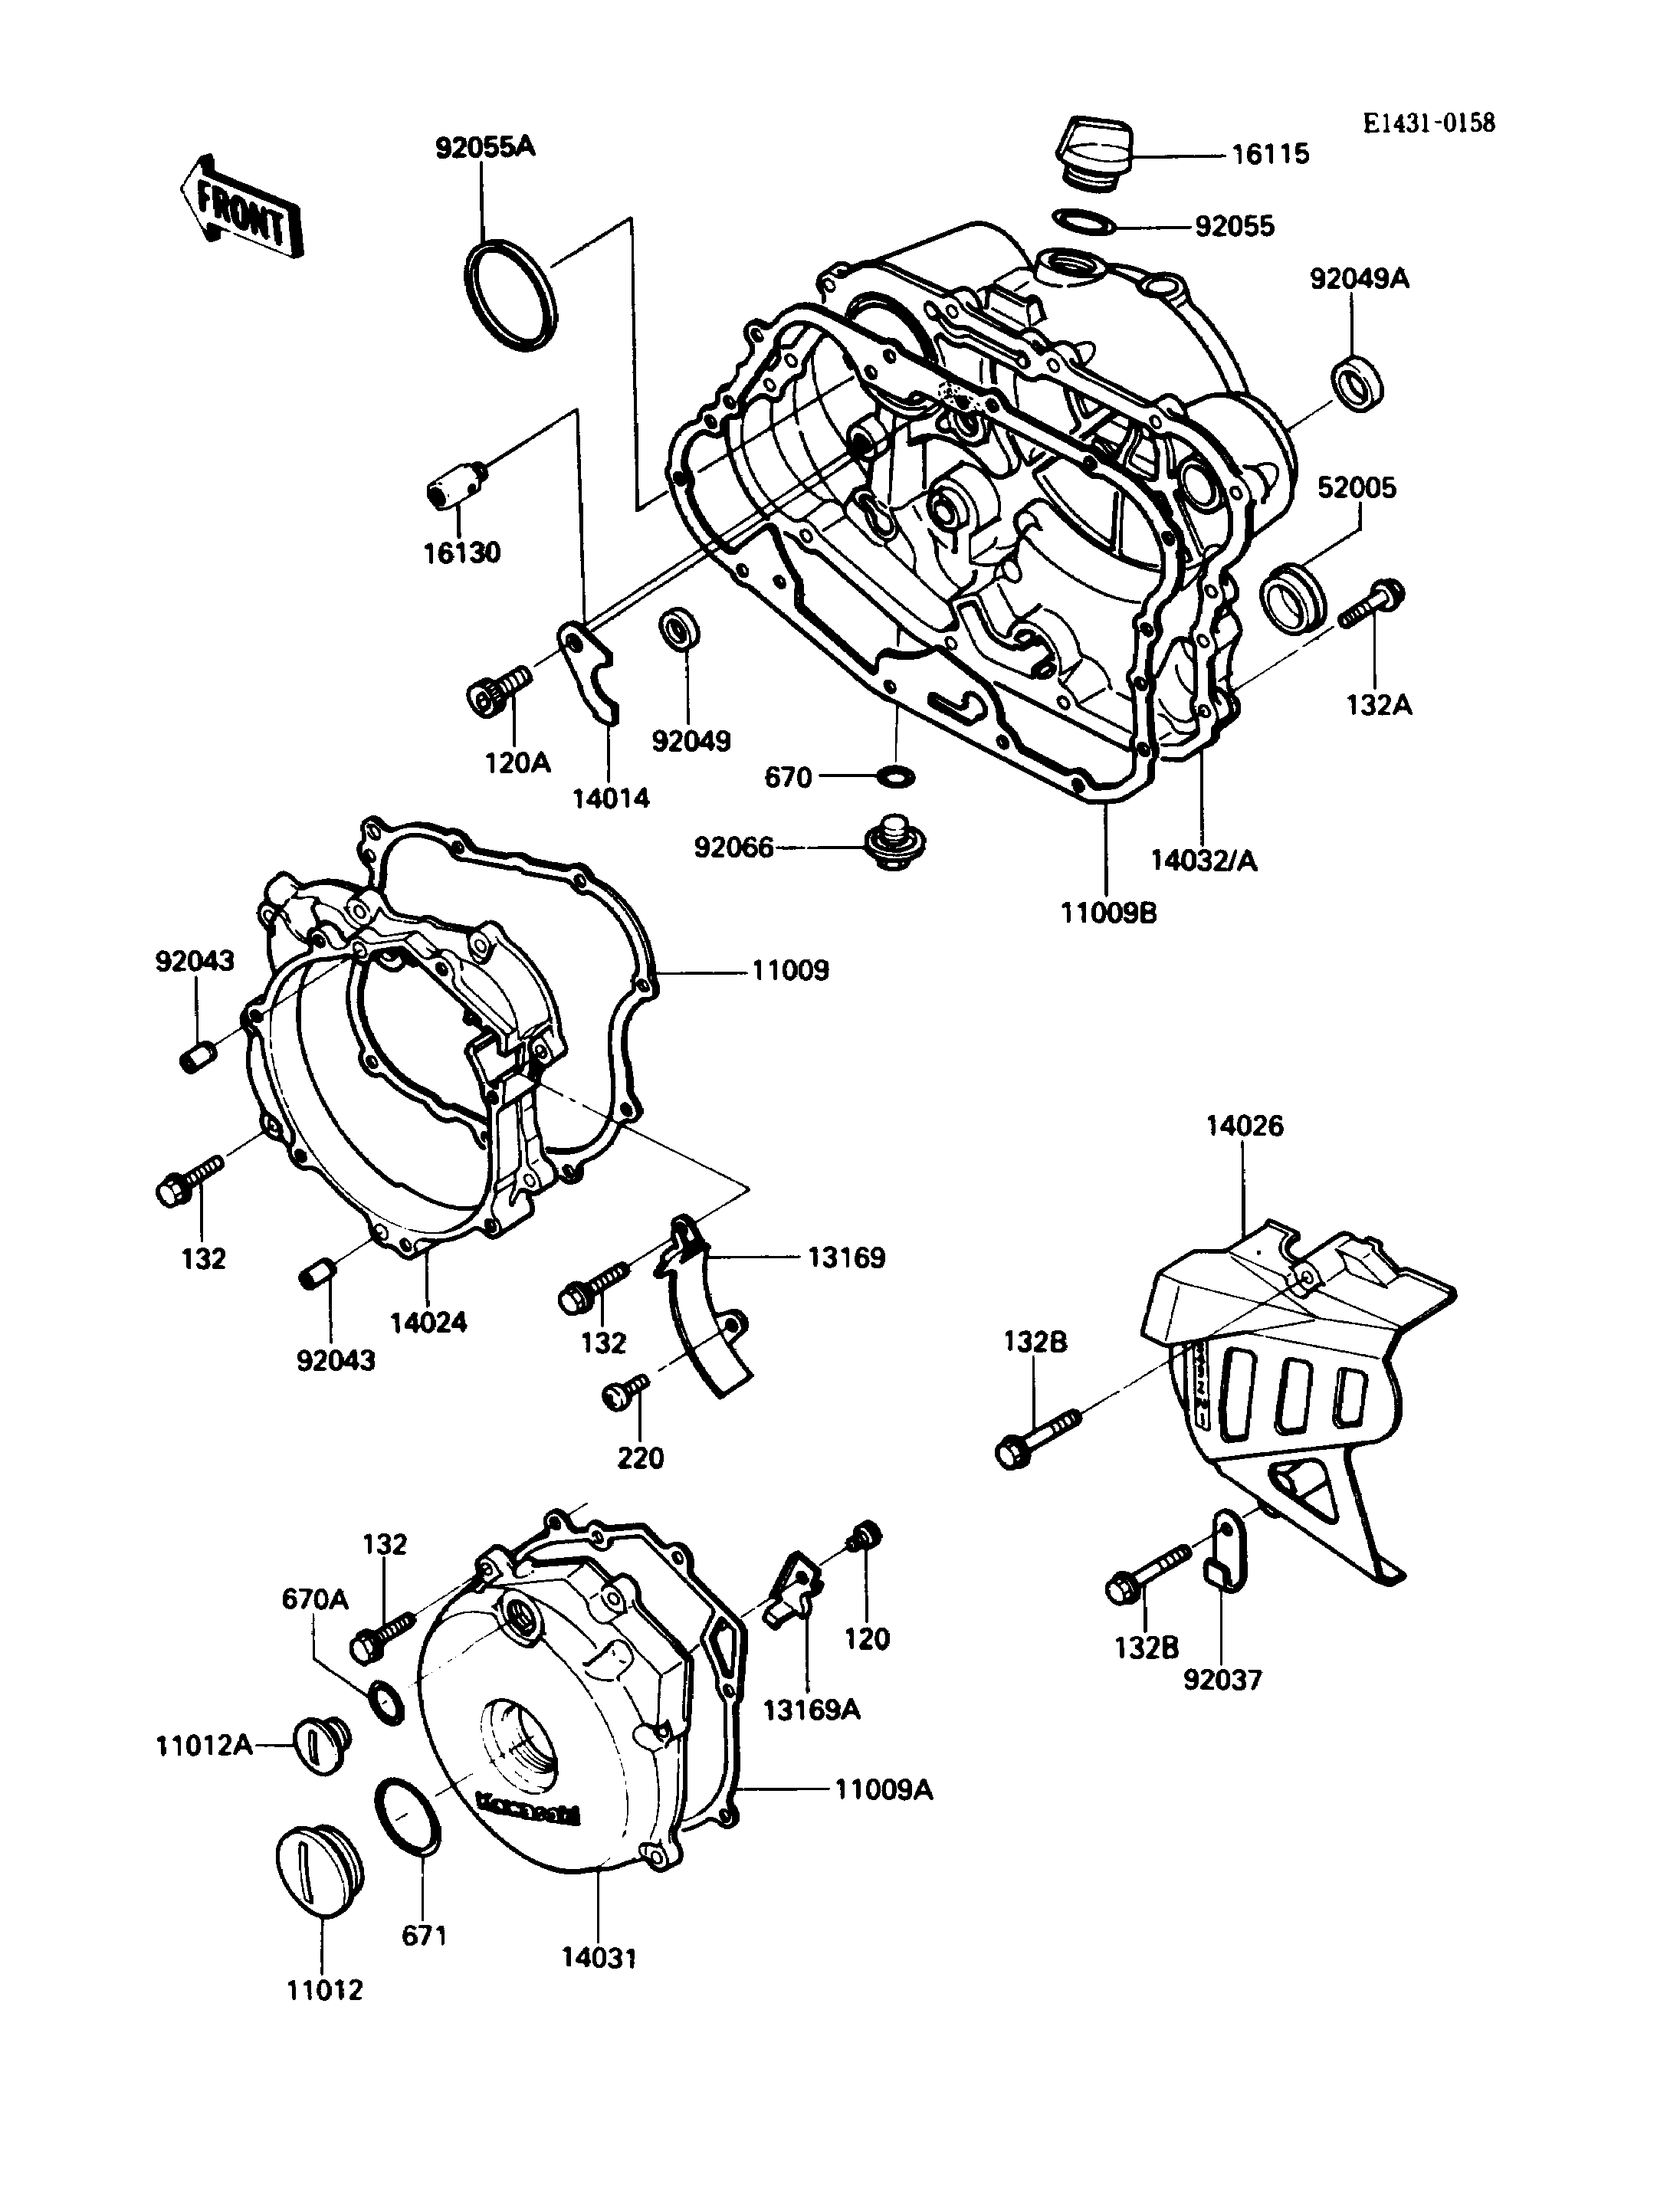 Engine Cover(s)